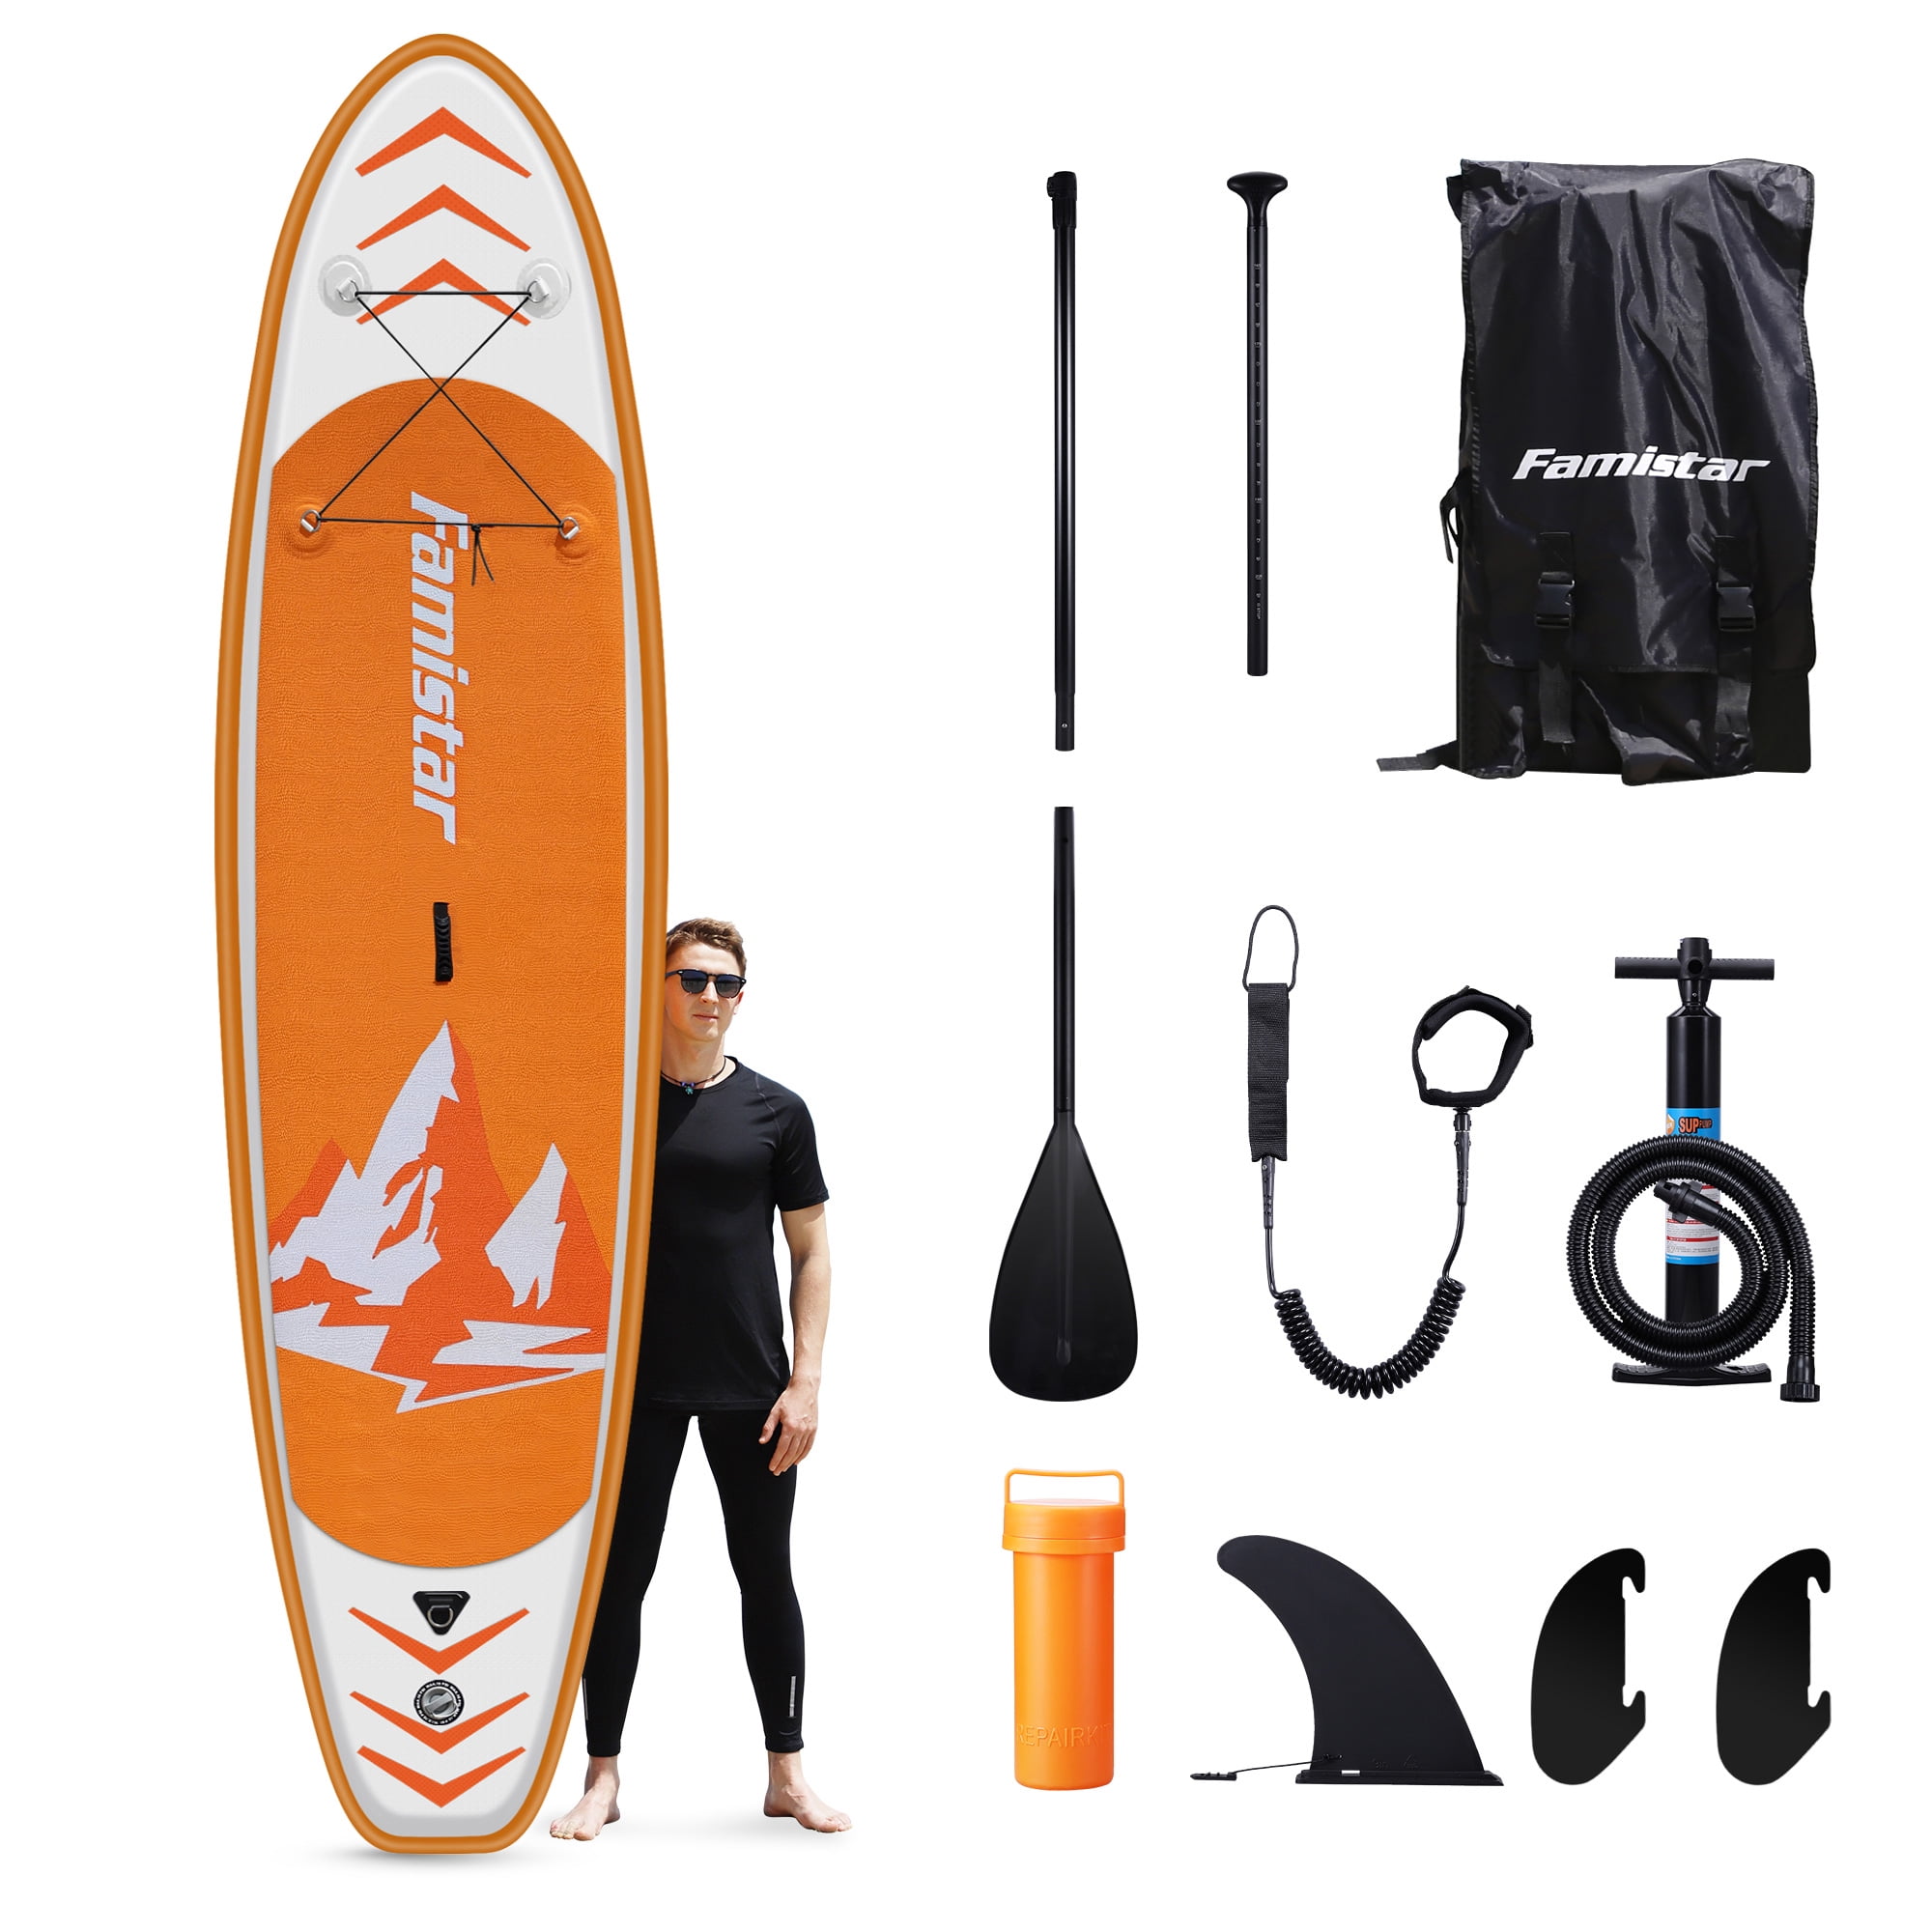 Durable and Light Weight ISUP Paddle Board with Premium Accessories Stable Wide Stance Standing Boat for Youth and Adult ESTABLA Inflatable Stand Up Paddle Board 106 x 32 x 6